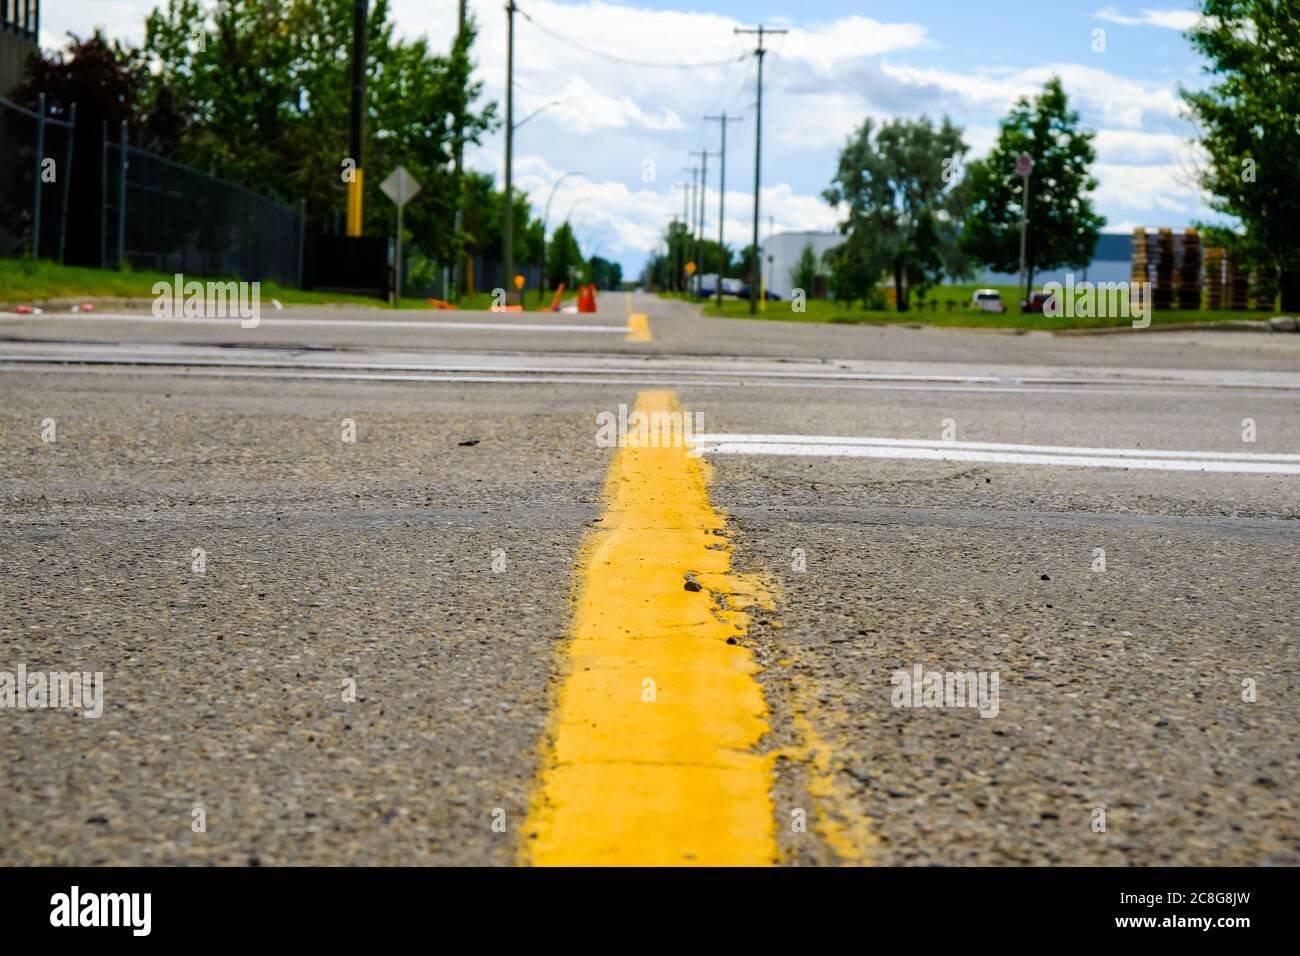 Yellow dividing line on a street in city - Low Angle Stock Photo